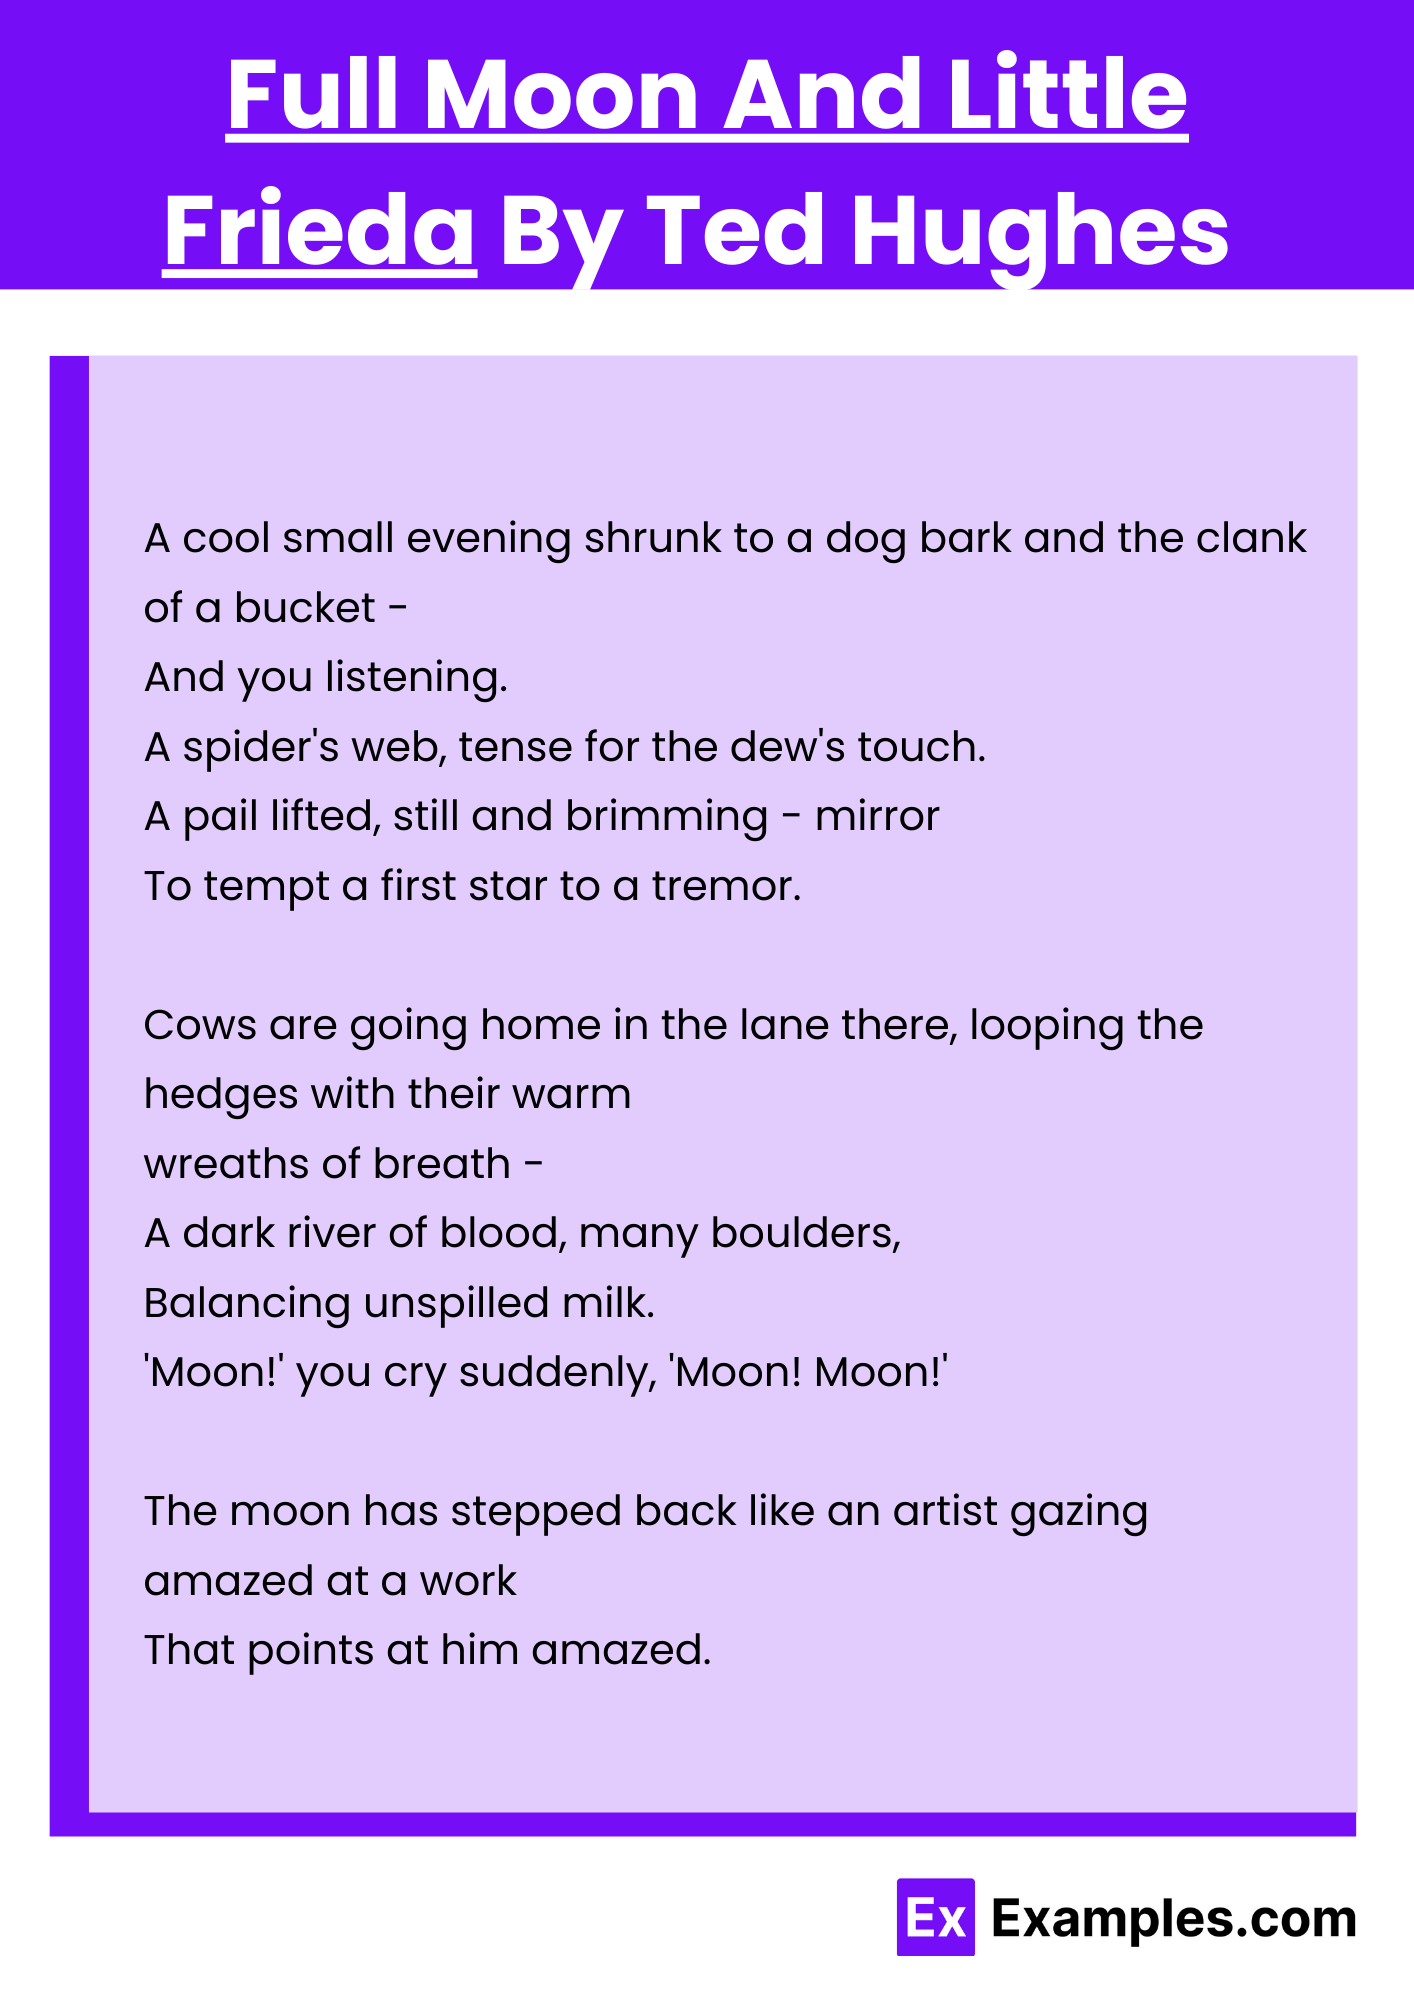 Full Moon And Little Frieda By Ted Hughes